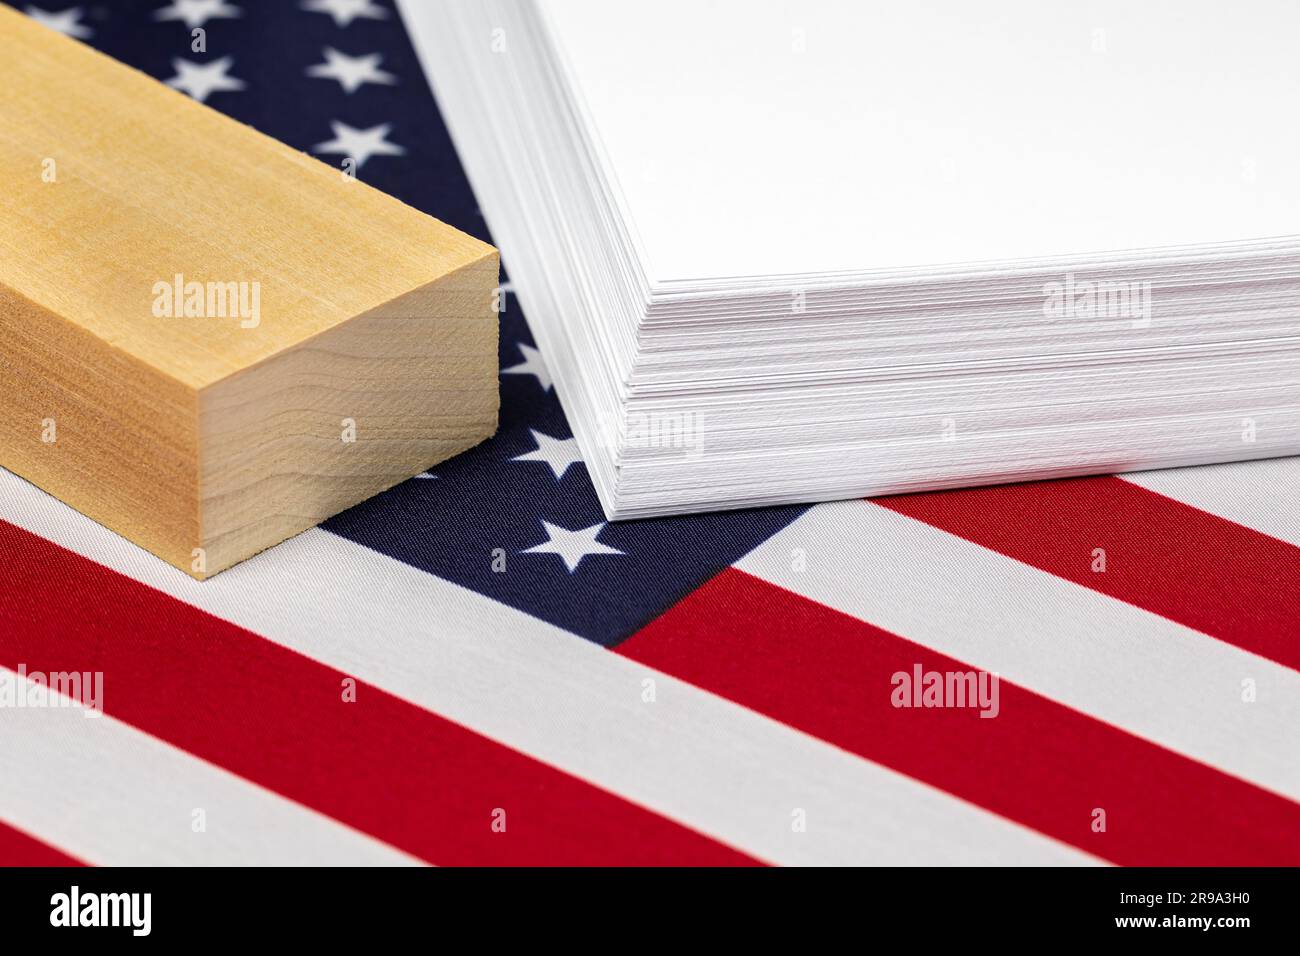 Ream of printer paper, wood and United States of America flag. Paper products industry, trade and manufacturing concept Stock Photo